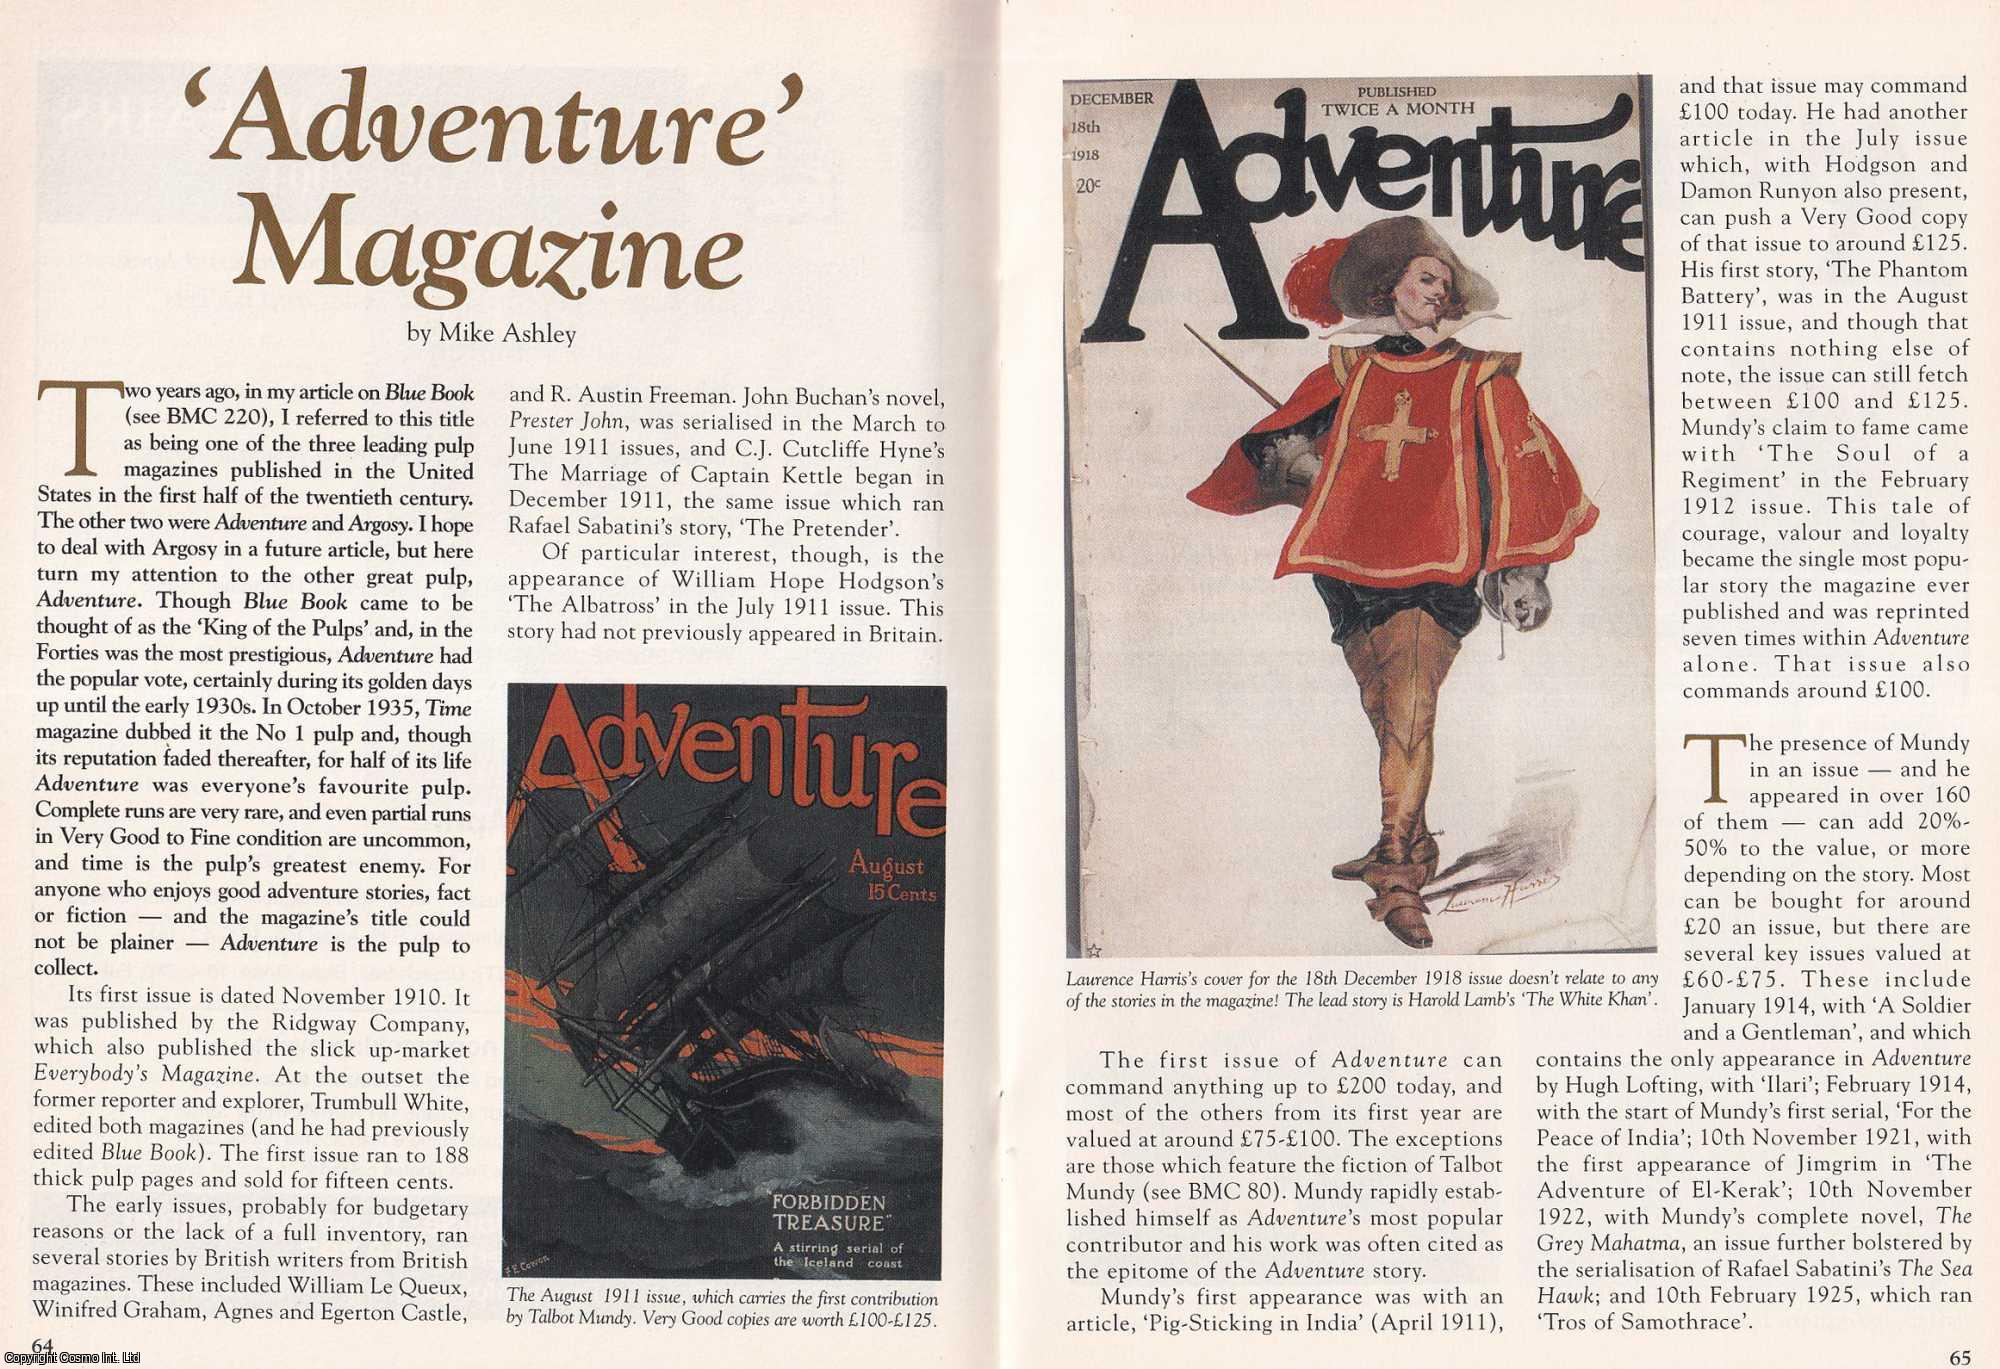 Mike Ashley - Adventure Magazine. This is an original article separated from an issue of The Book & Magazine Collector publication.